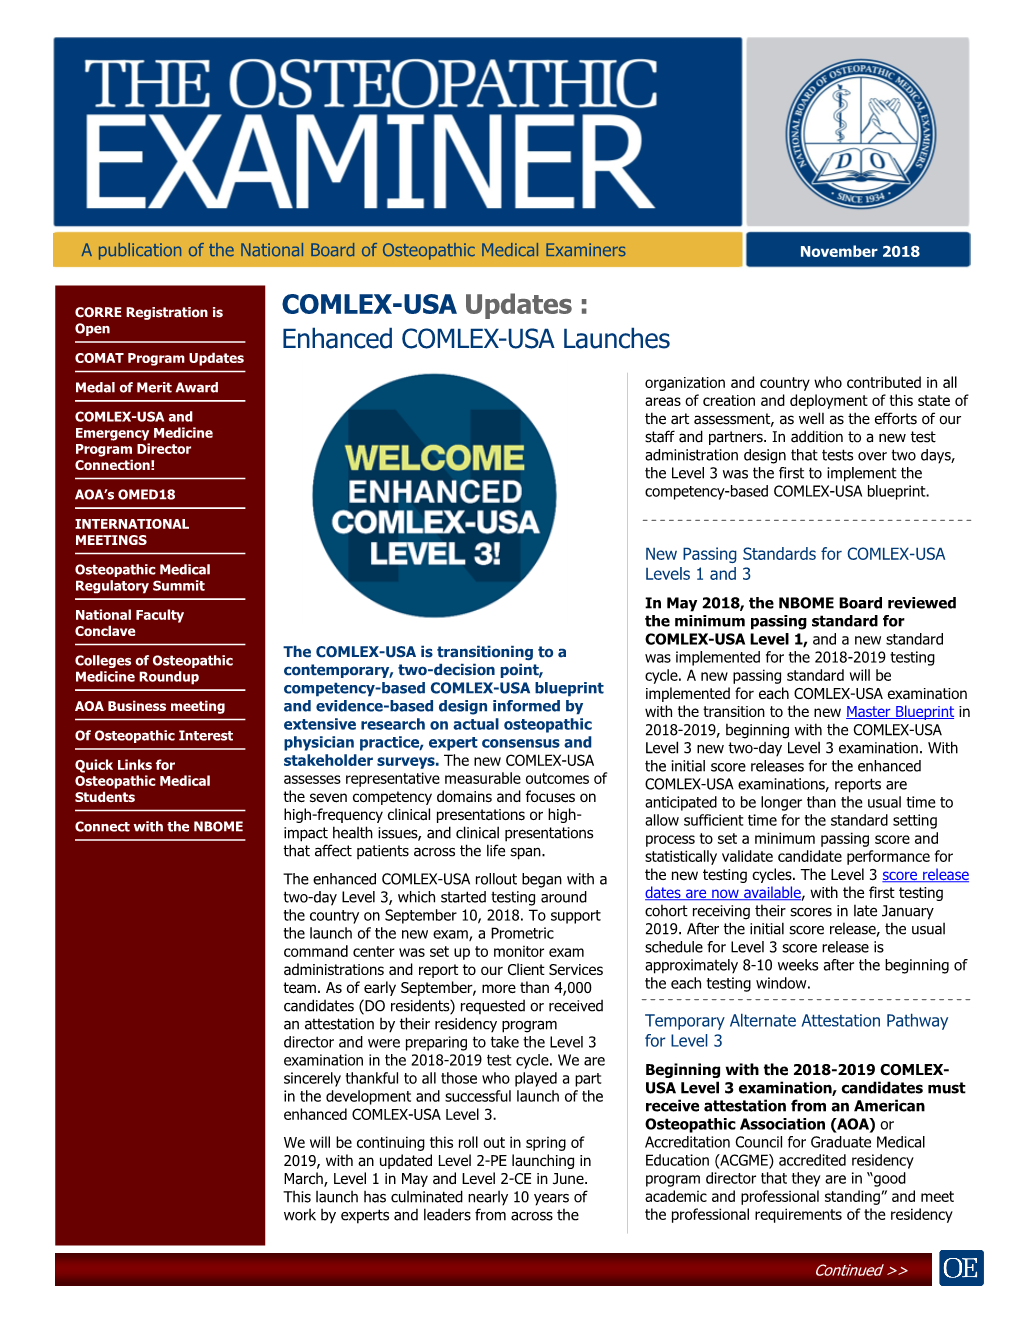 The Osteopathic Examiner